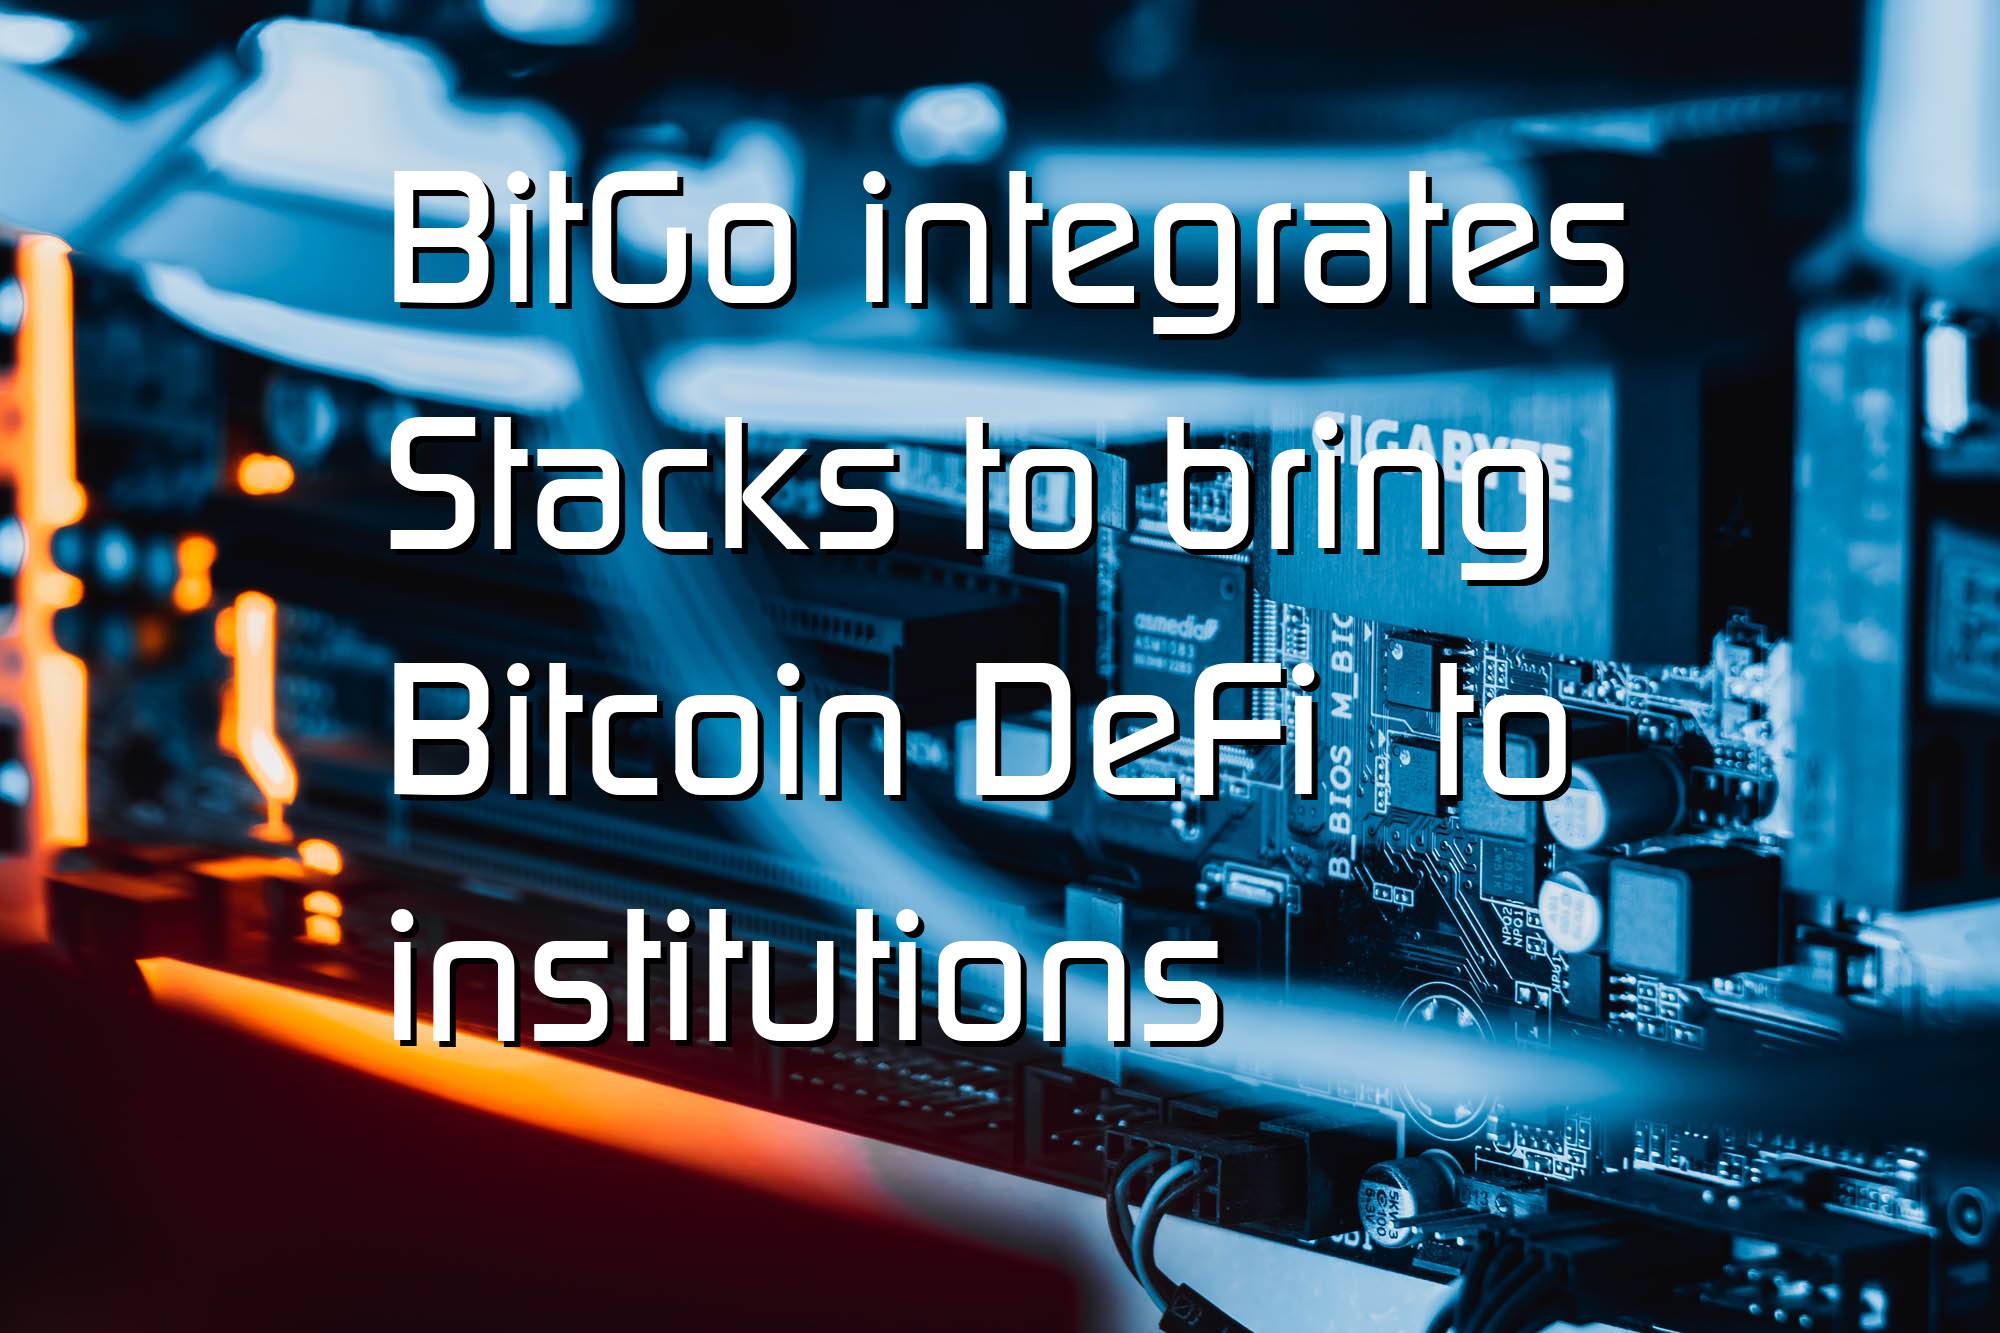 @$62735: BitGo integrates Stacks to bring Bitcoin DeFi  to institutions